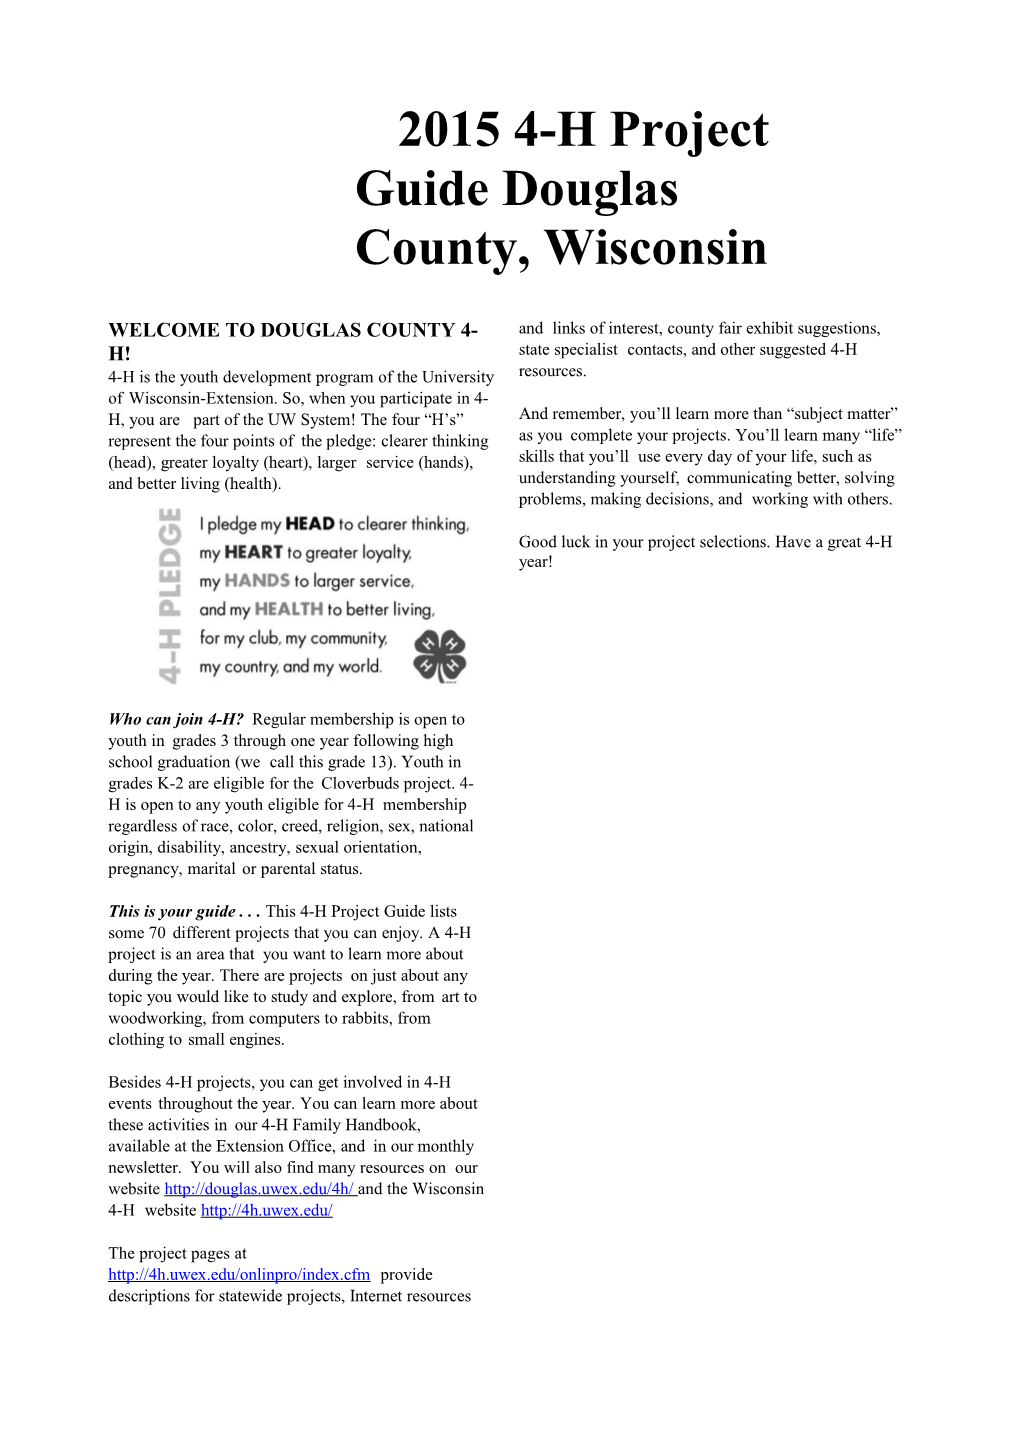 2009 Wisconsin 4-H Project Guide